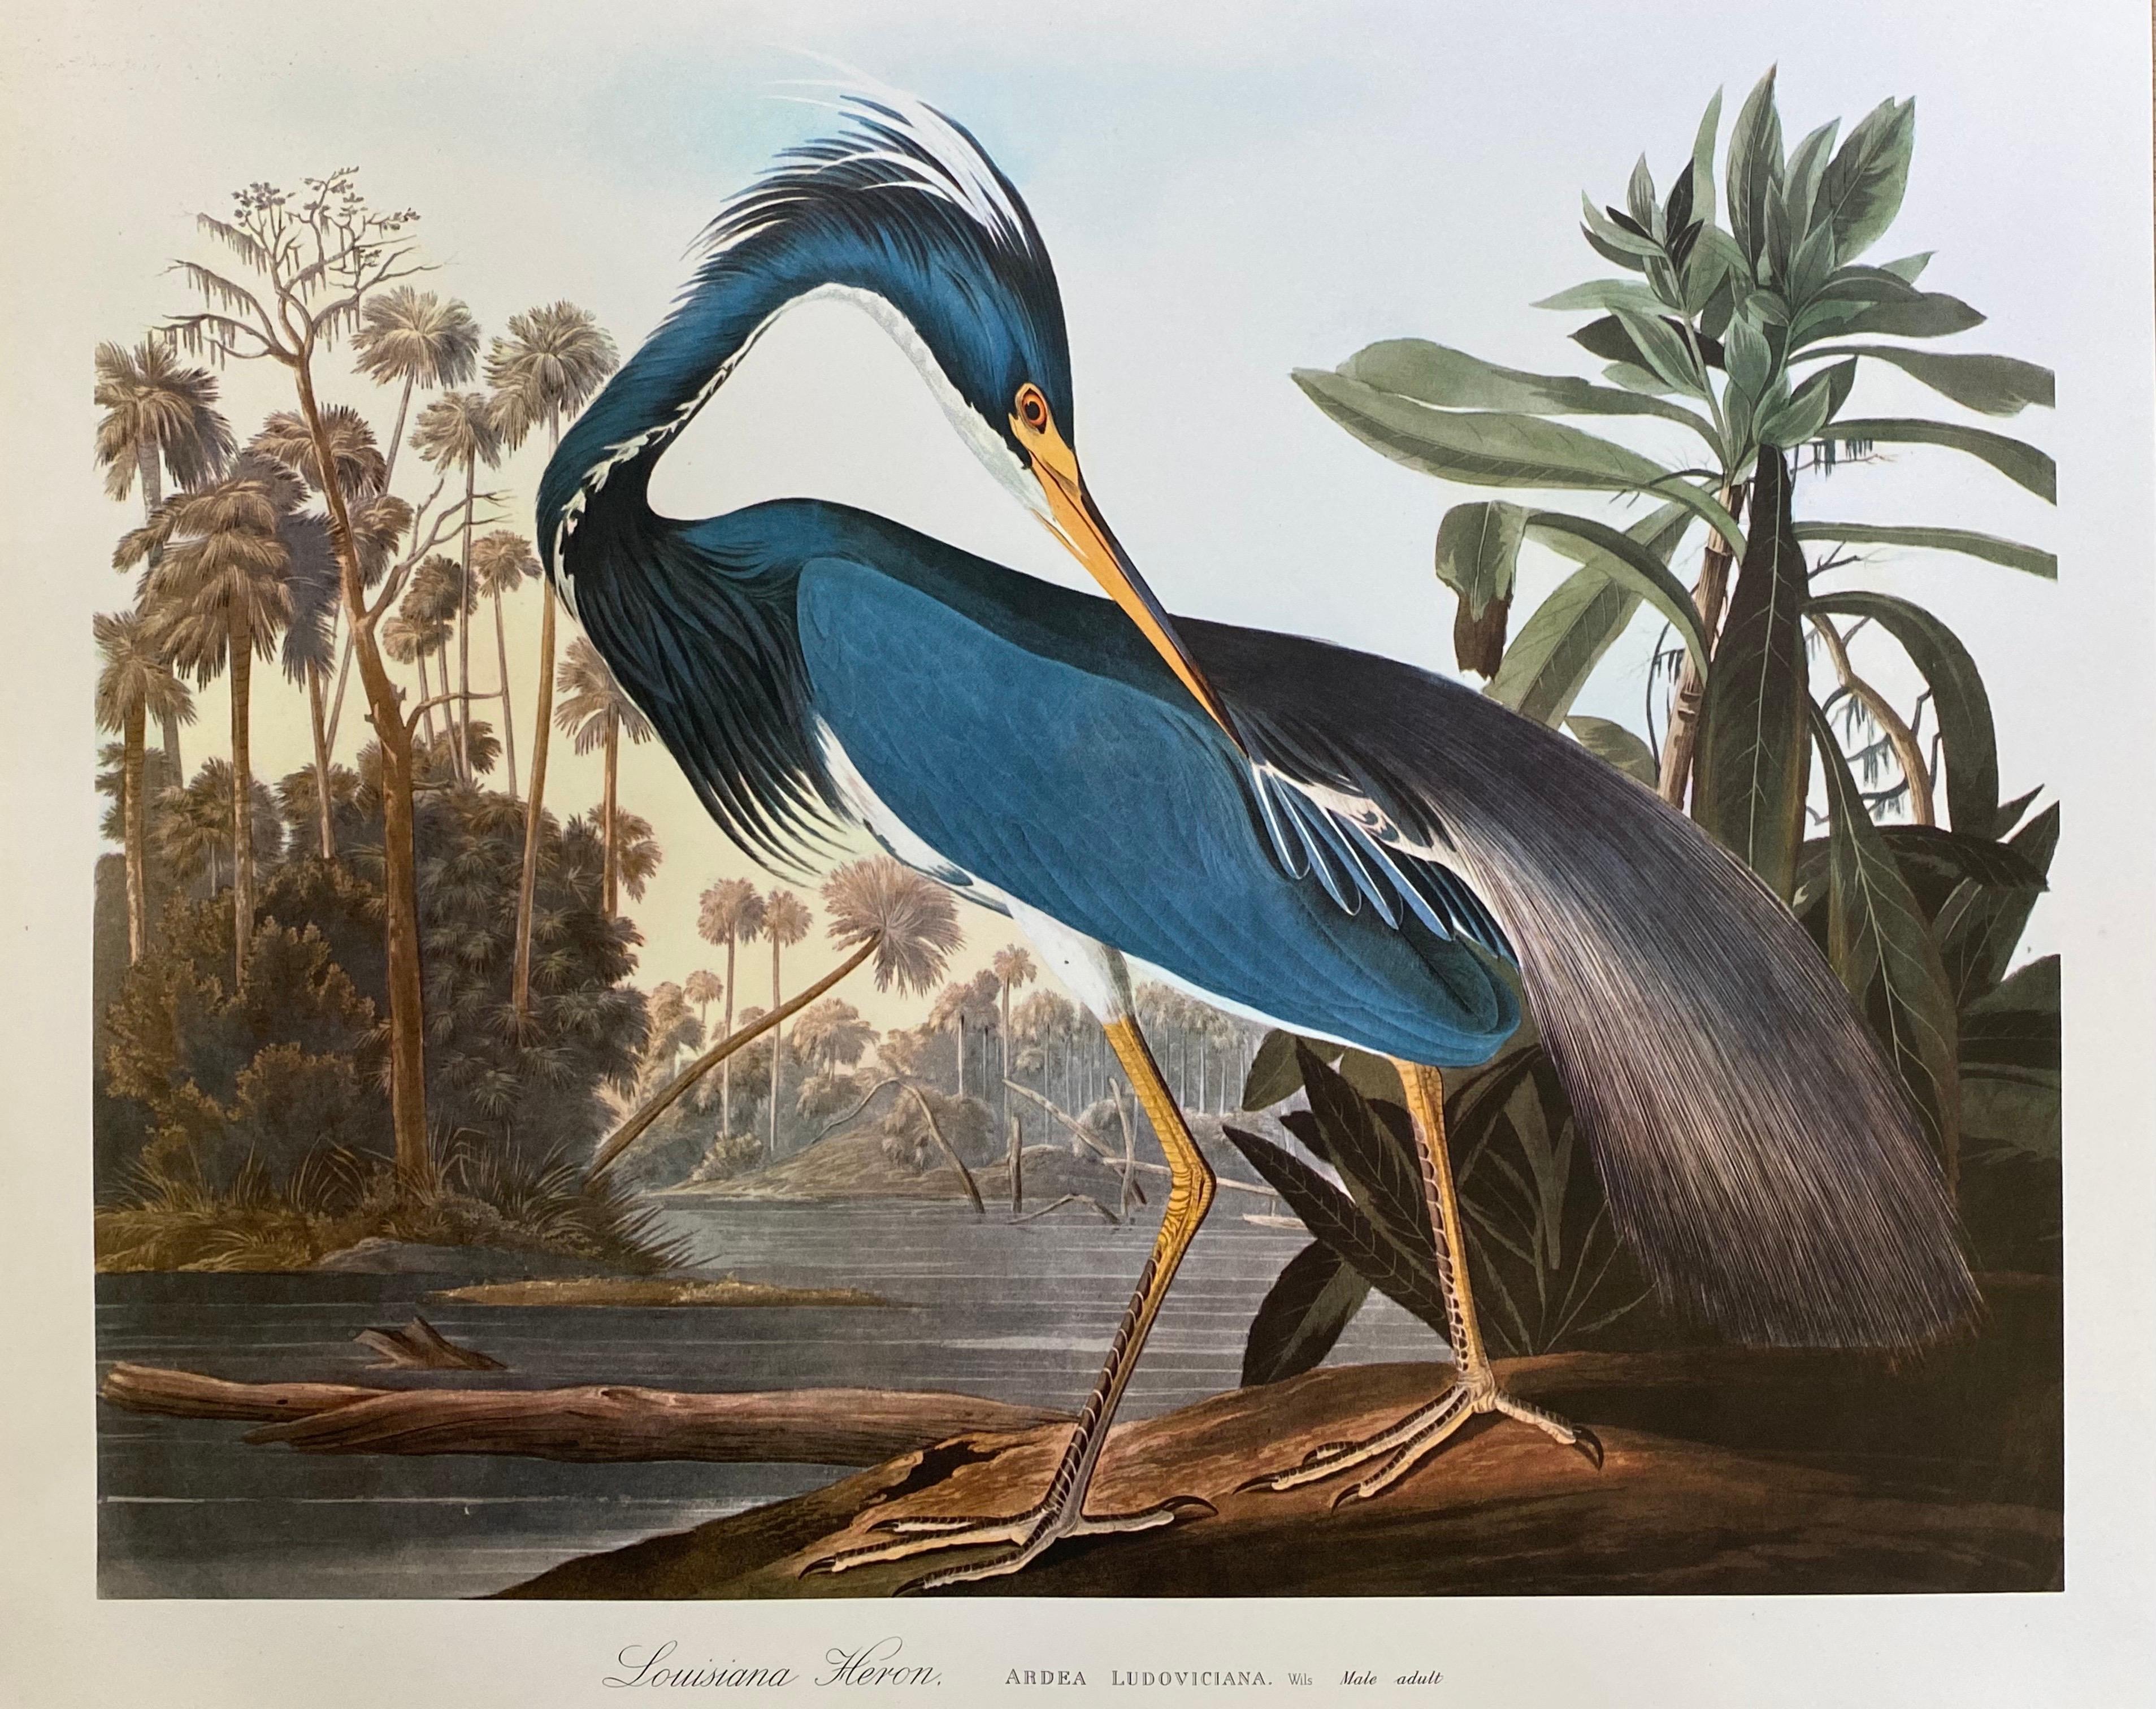 Classical Bird print, 
after John James Audubon, 
printed by Harry N. Abrams, Publishers, New York
unframed, 17 x 14 inches color print on paper
Condition: very good
Provenance: from a private collector here in the UK. 

Free shipping